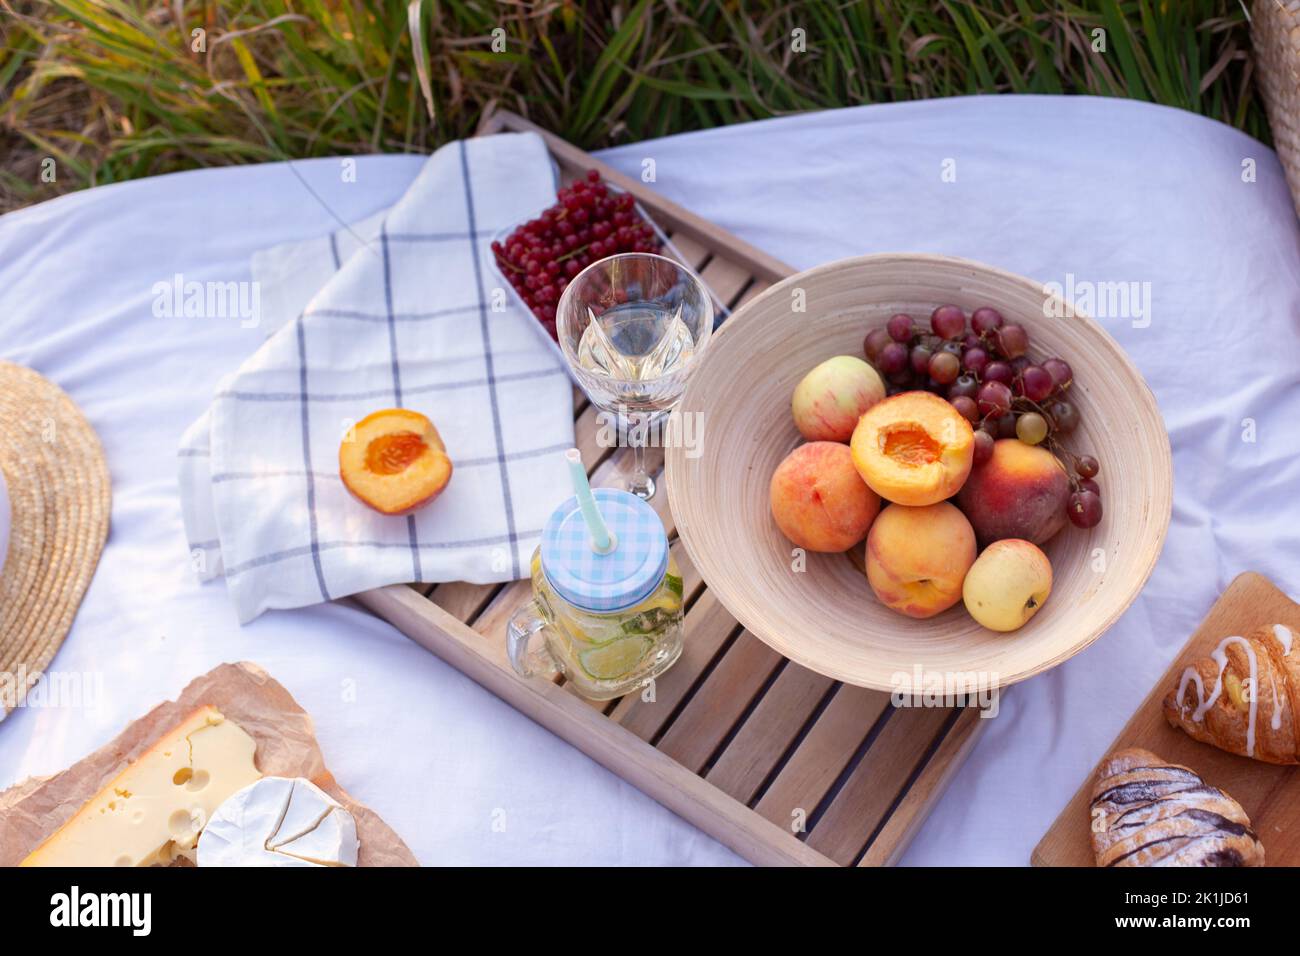 Picnic set up hi-res stock photography and images - Alamy